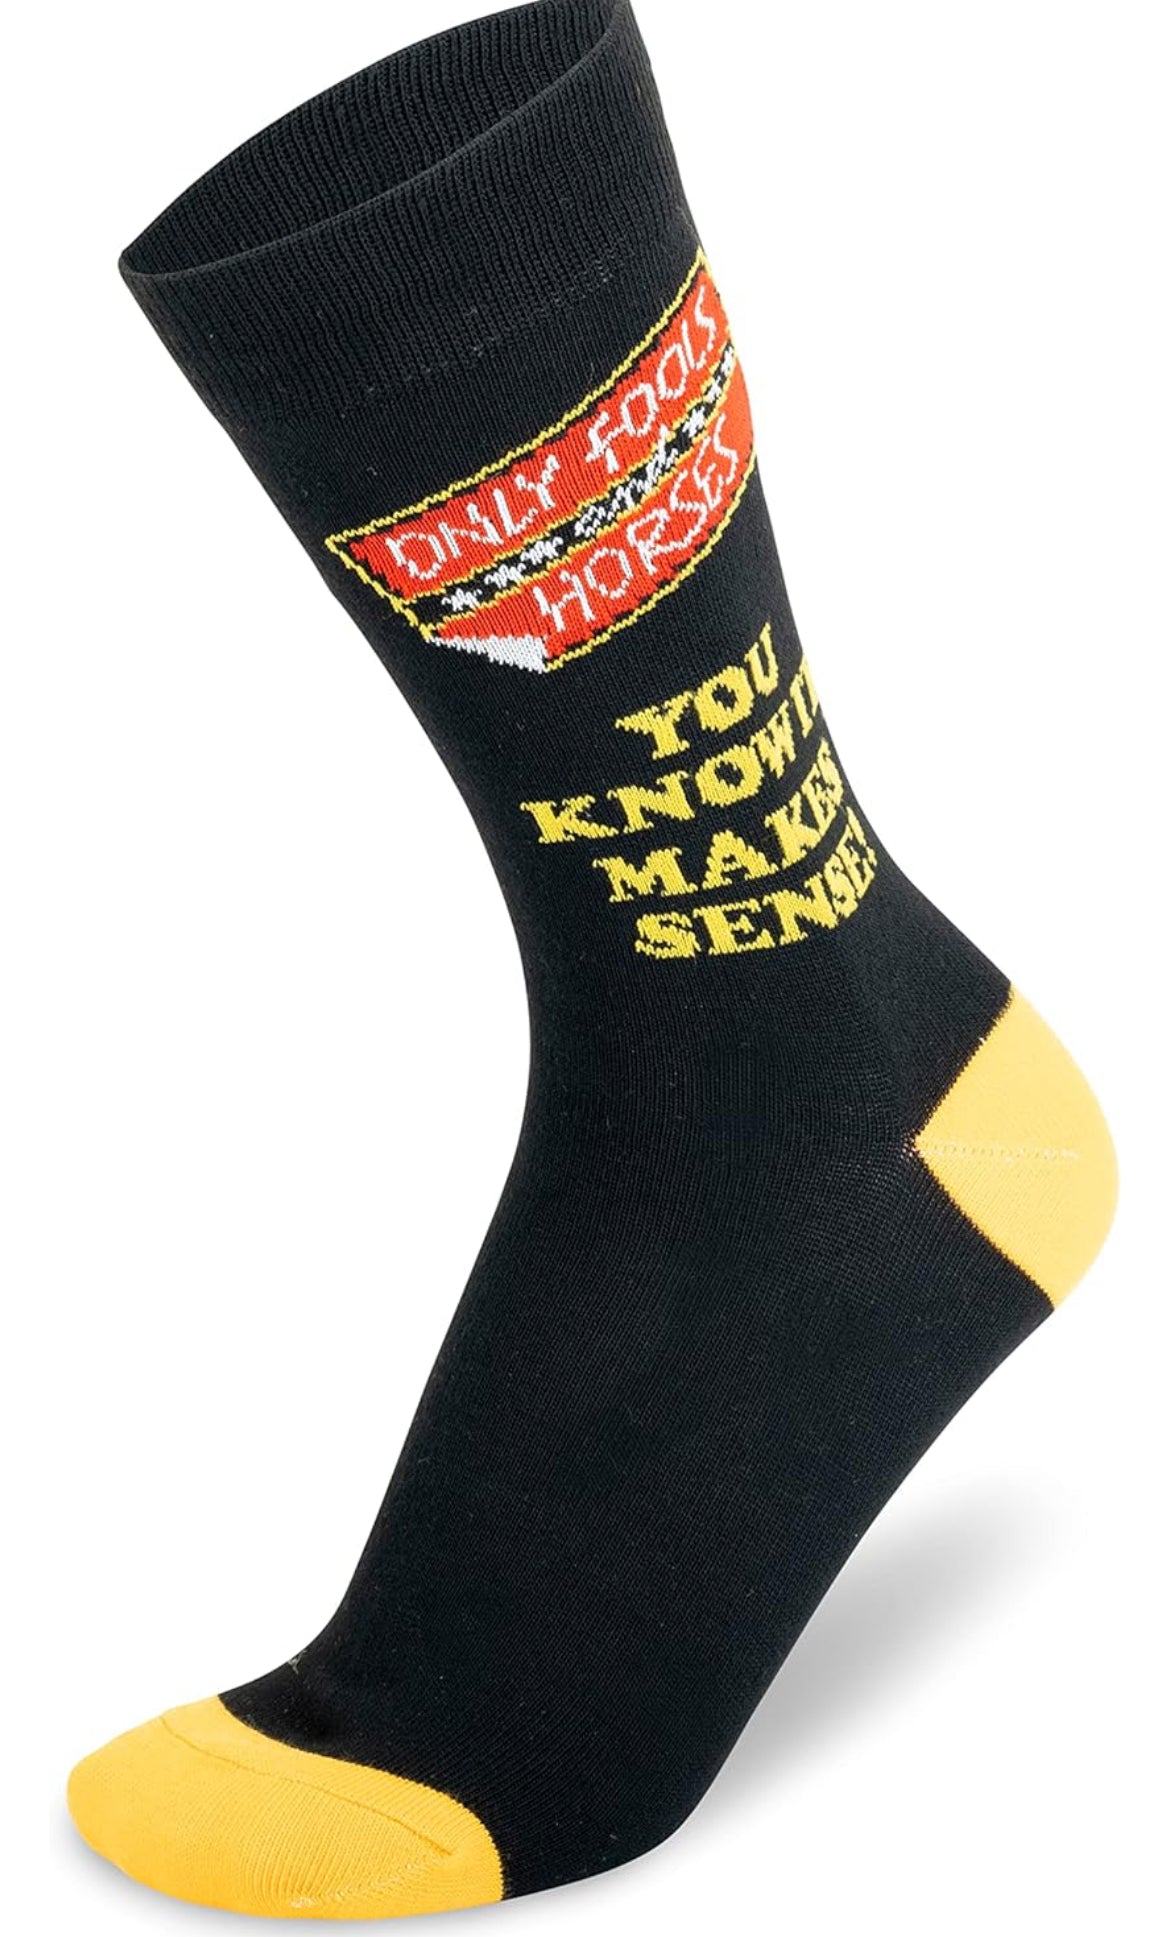 Only Fools and Horses - Pack of 3 Socks